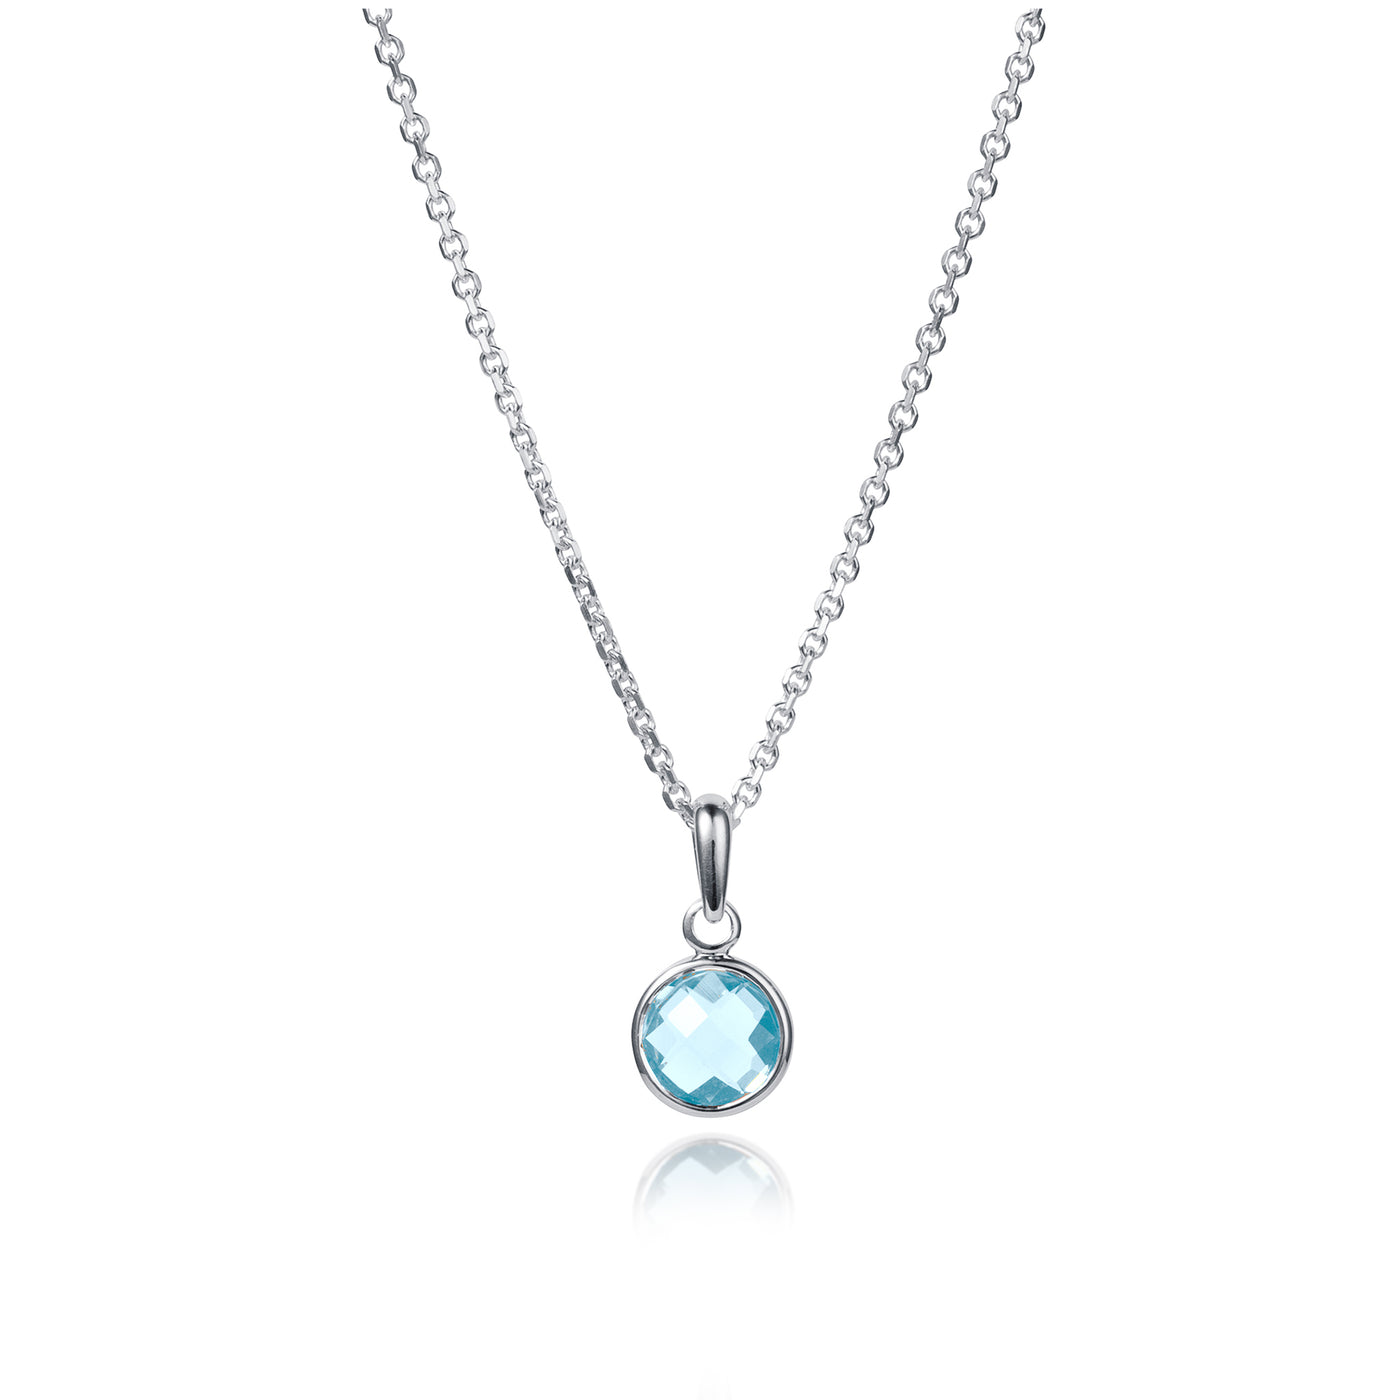 March Birthstone Necklace in Blue Topaz and Silver